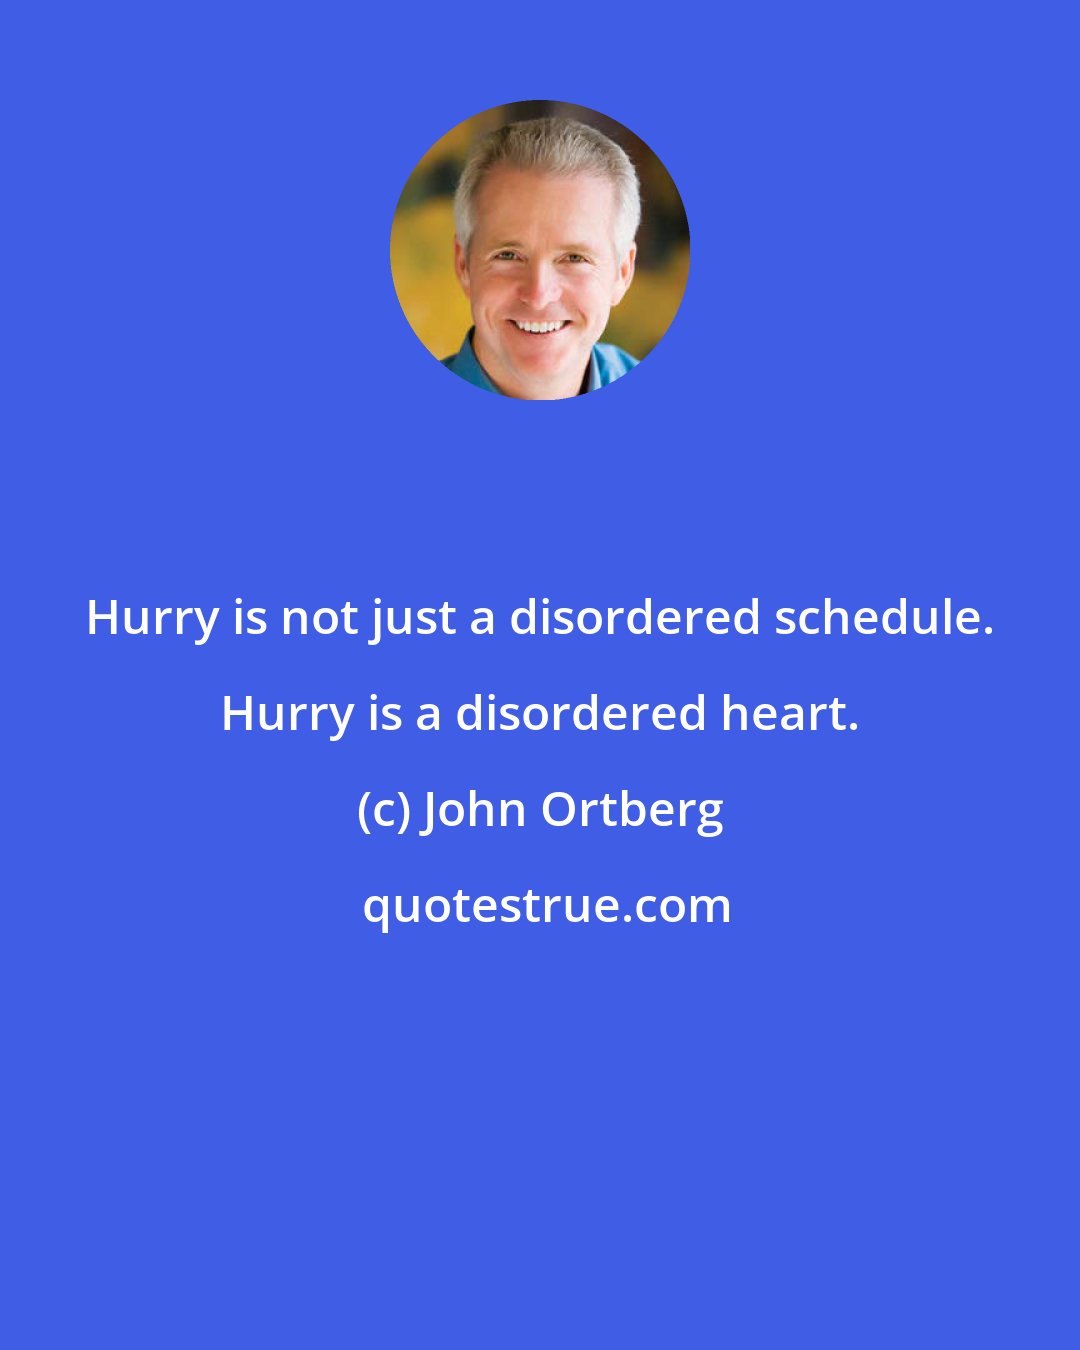 John Ortberg: Hurry is not just a disordered schedule. Hurry is a disordered heart.